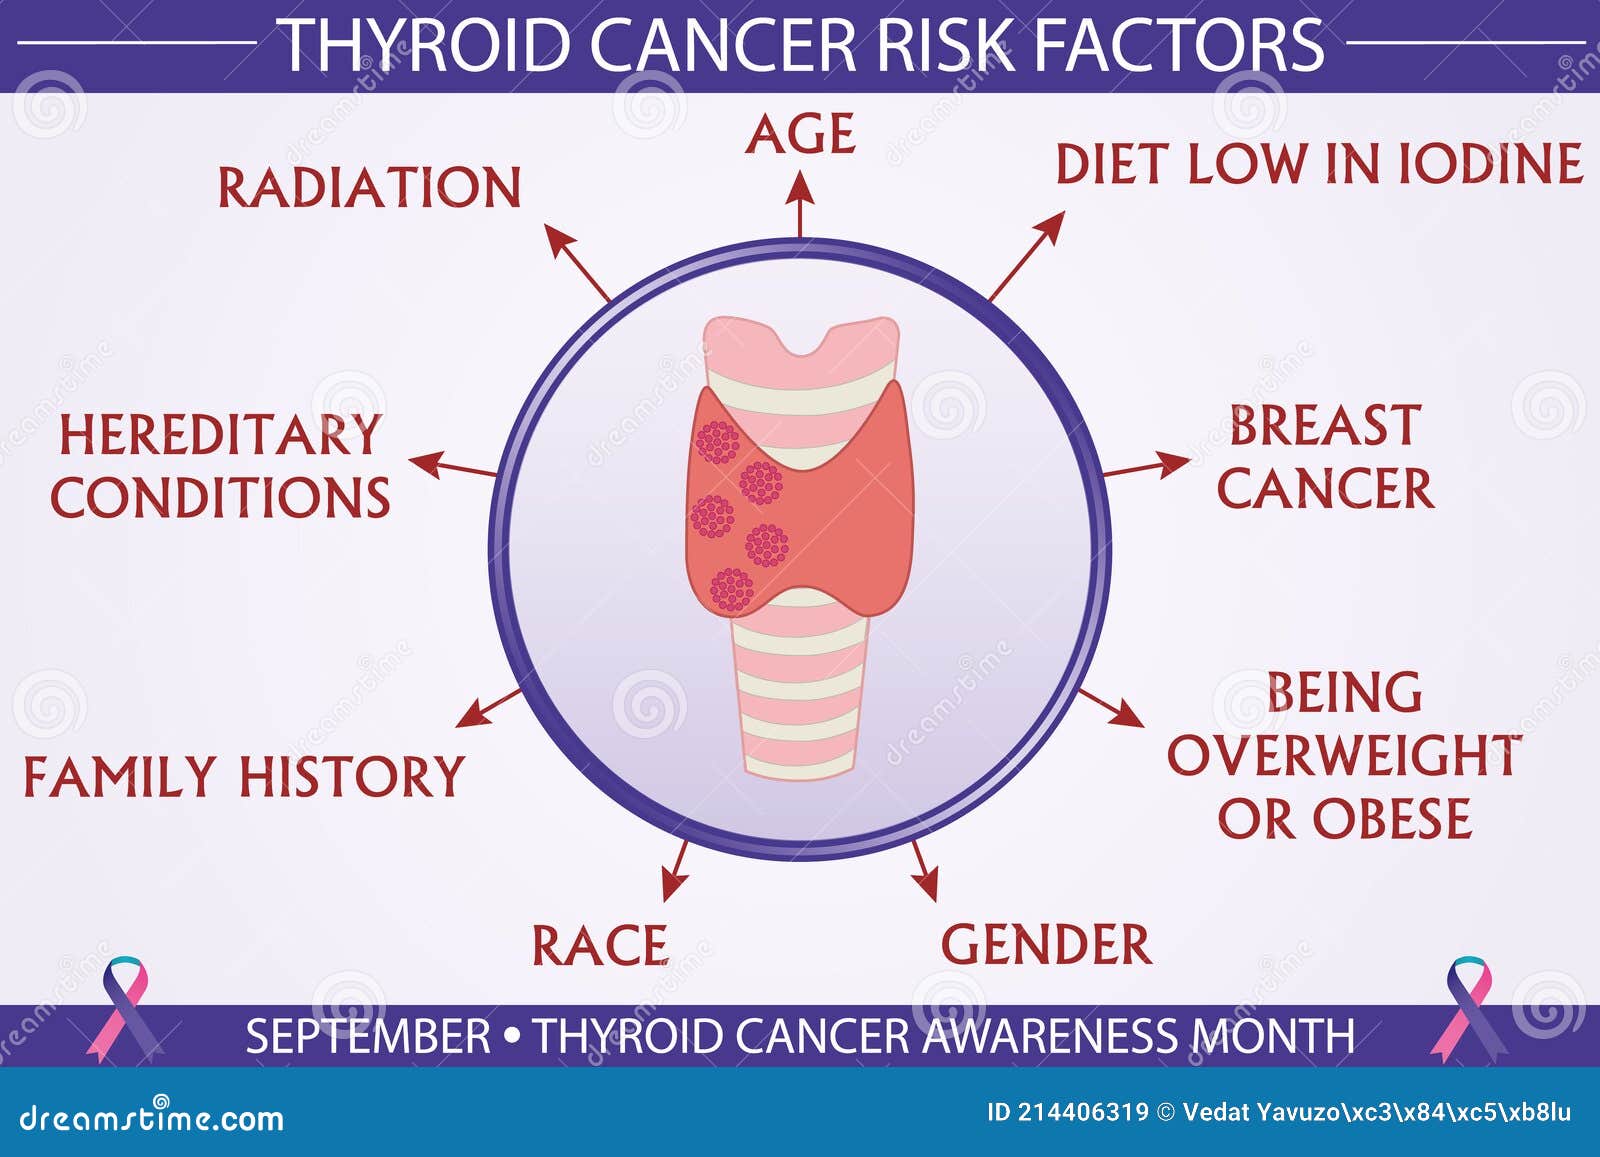 what causes thyroid cancer